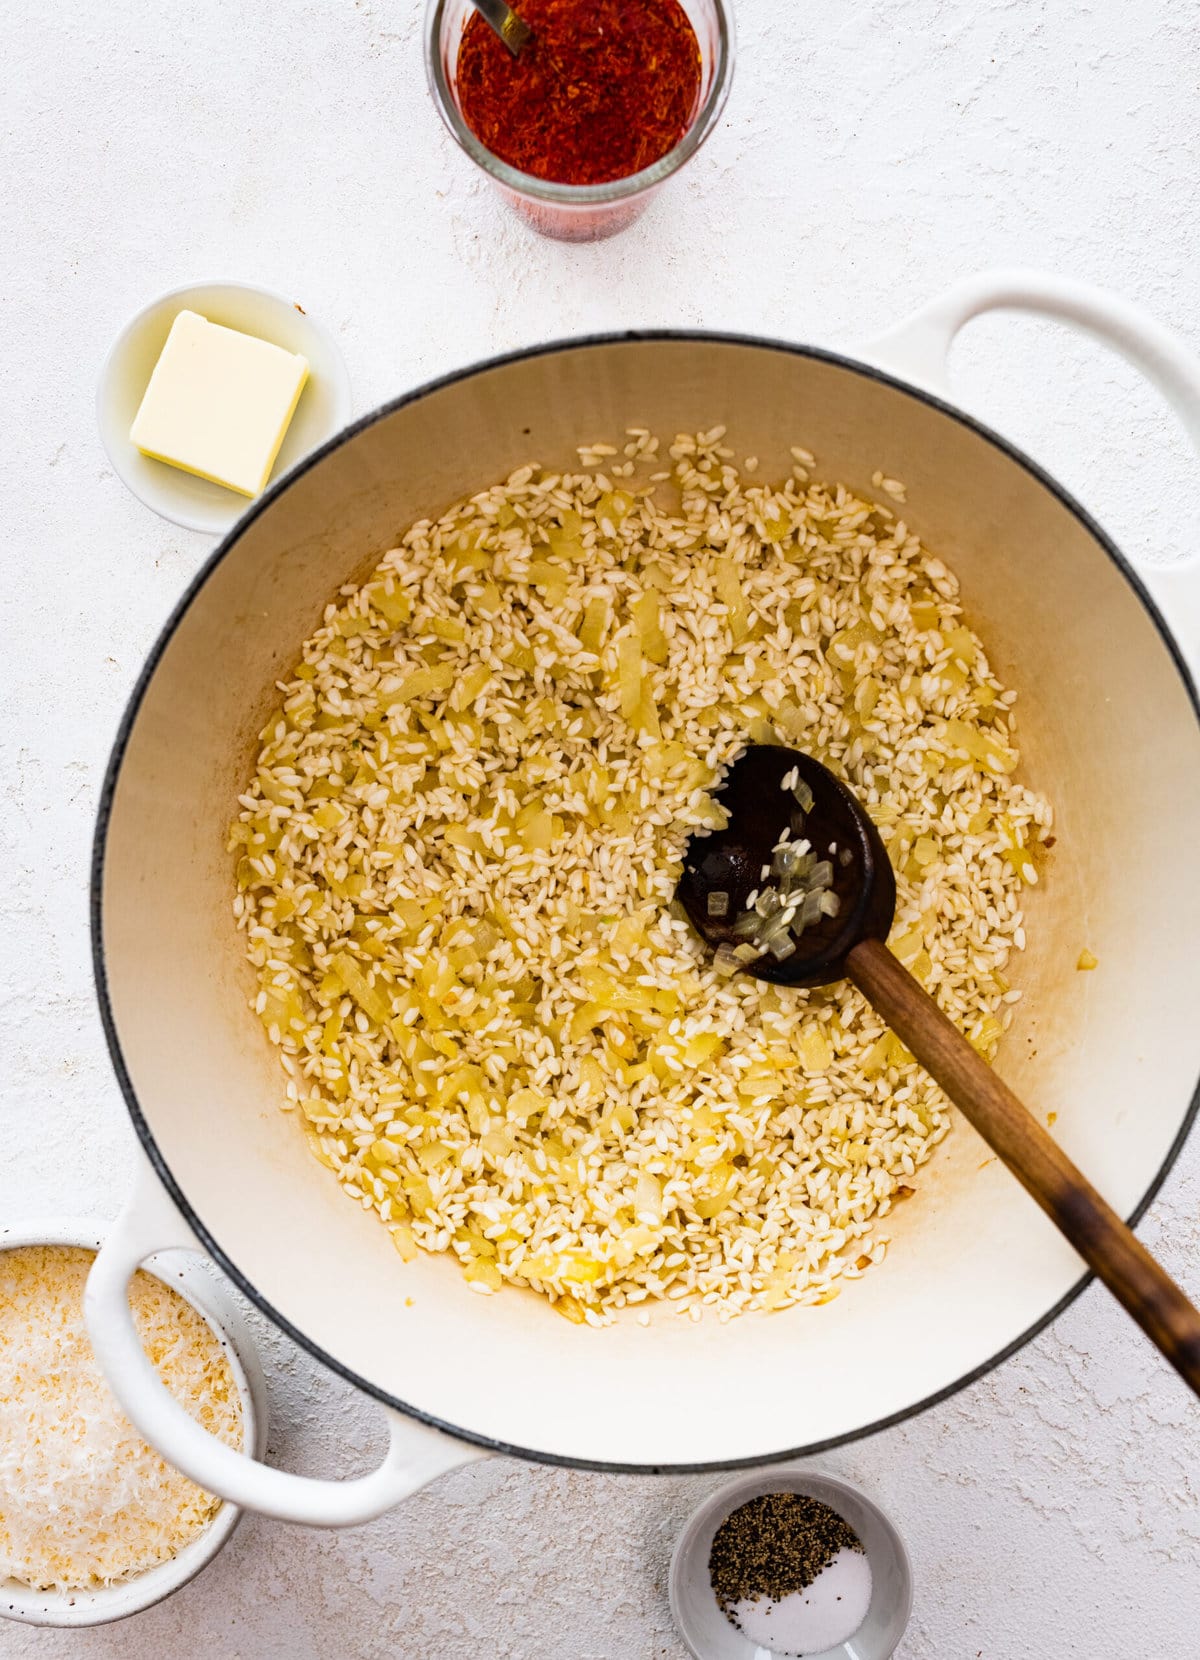 How to make risotto alla milanese step-by-step: sautéing the rice in the pot with wooden spoon.